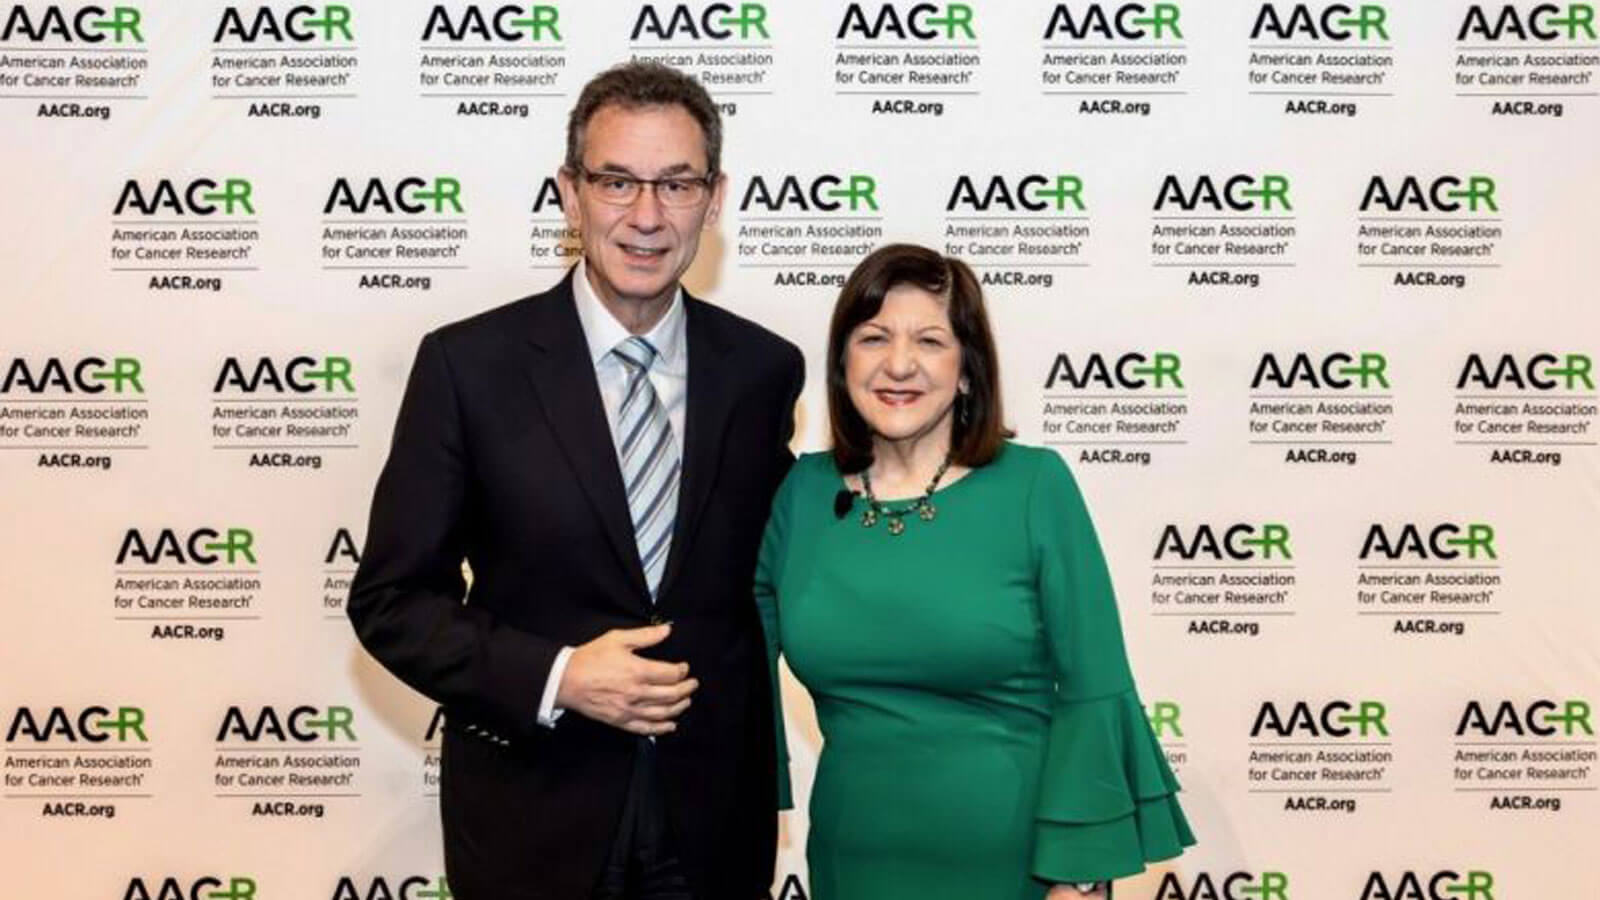 Albert Bourla recognized at AACR